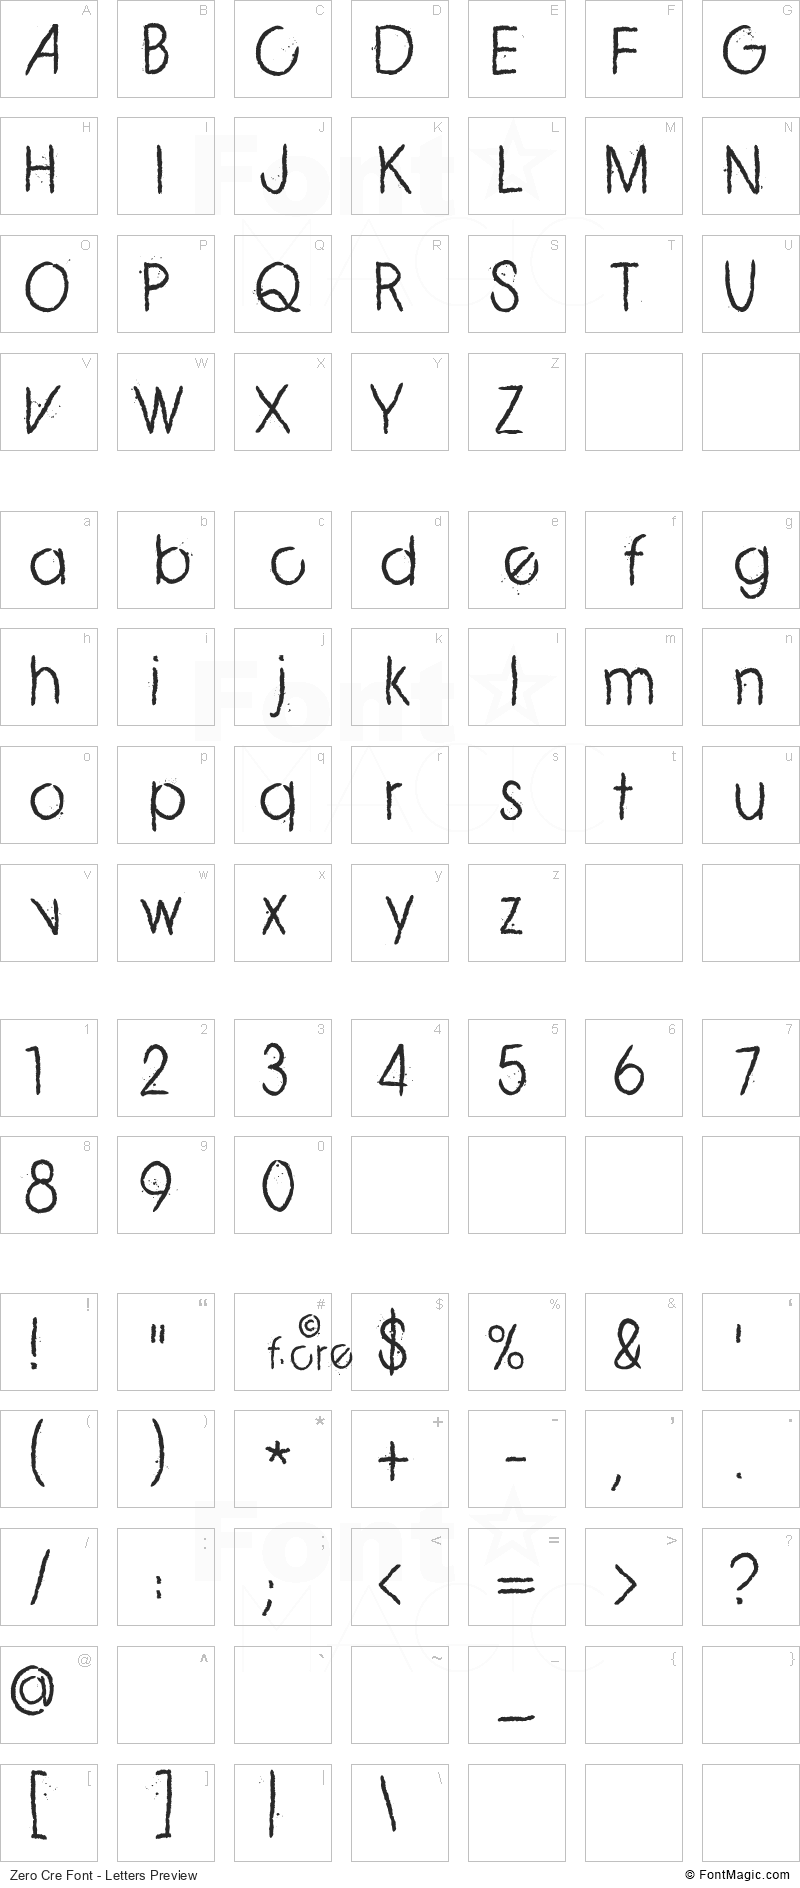 Zero Cre Font - All Latters Preview Chart